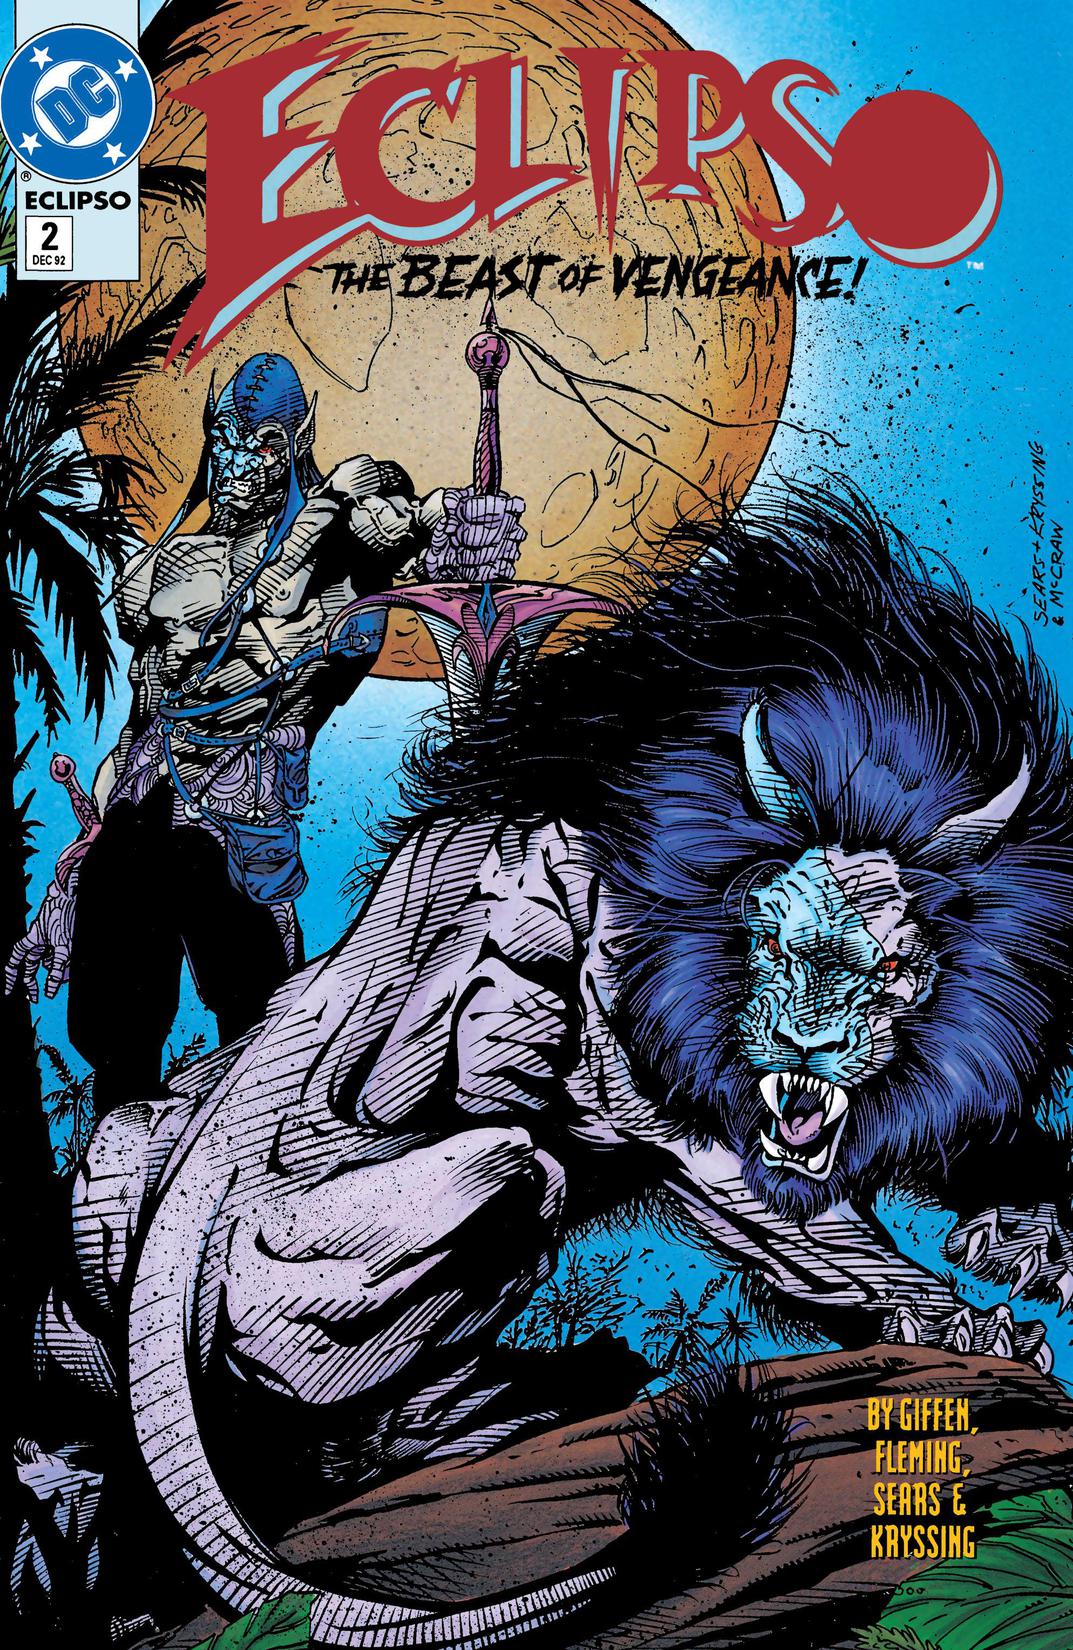 Eclipso #2 preview images